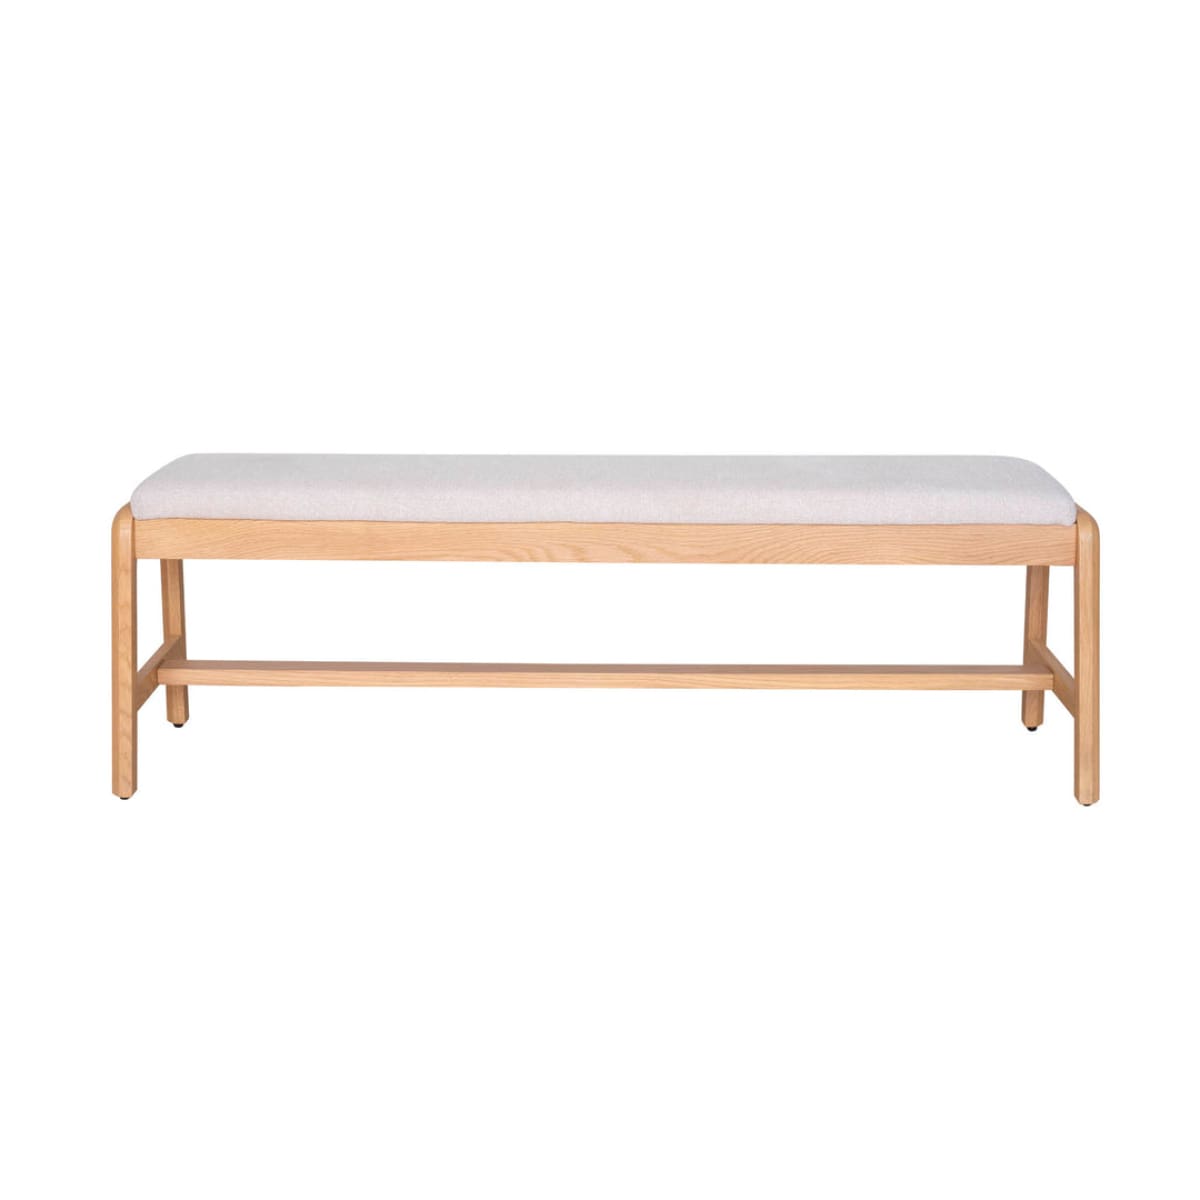 Arizona Dining Bench - Oatmeal - lh-import-dining-benches